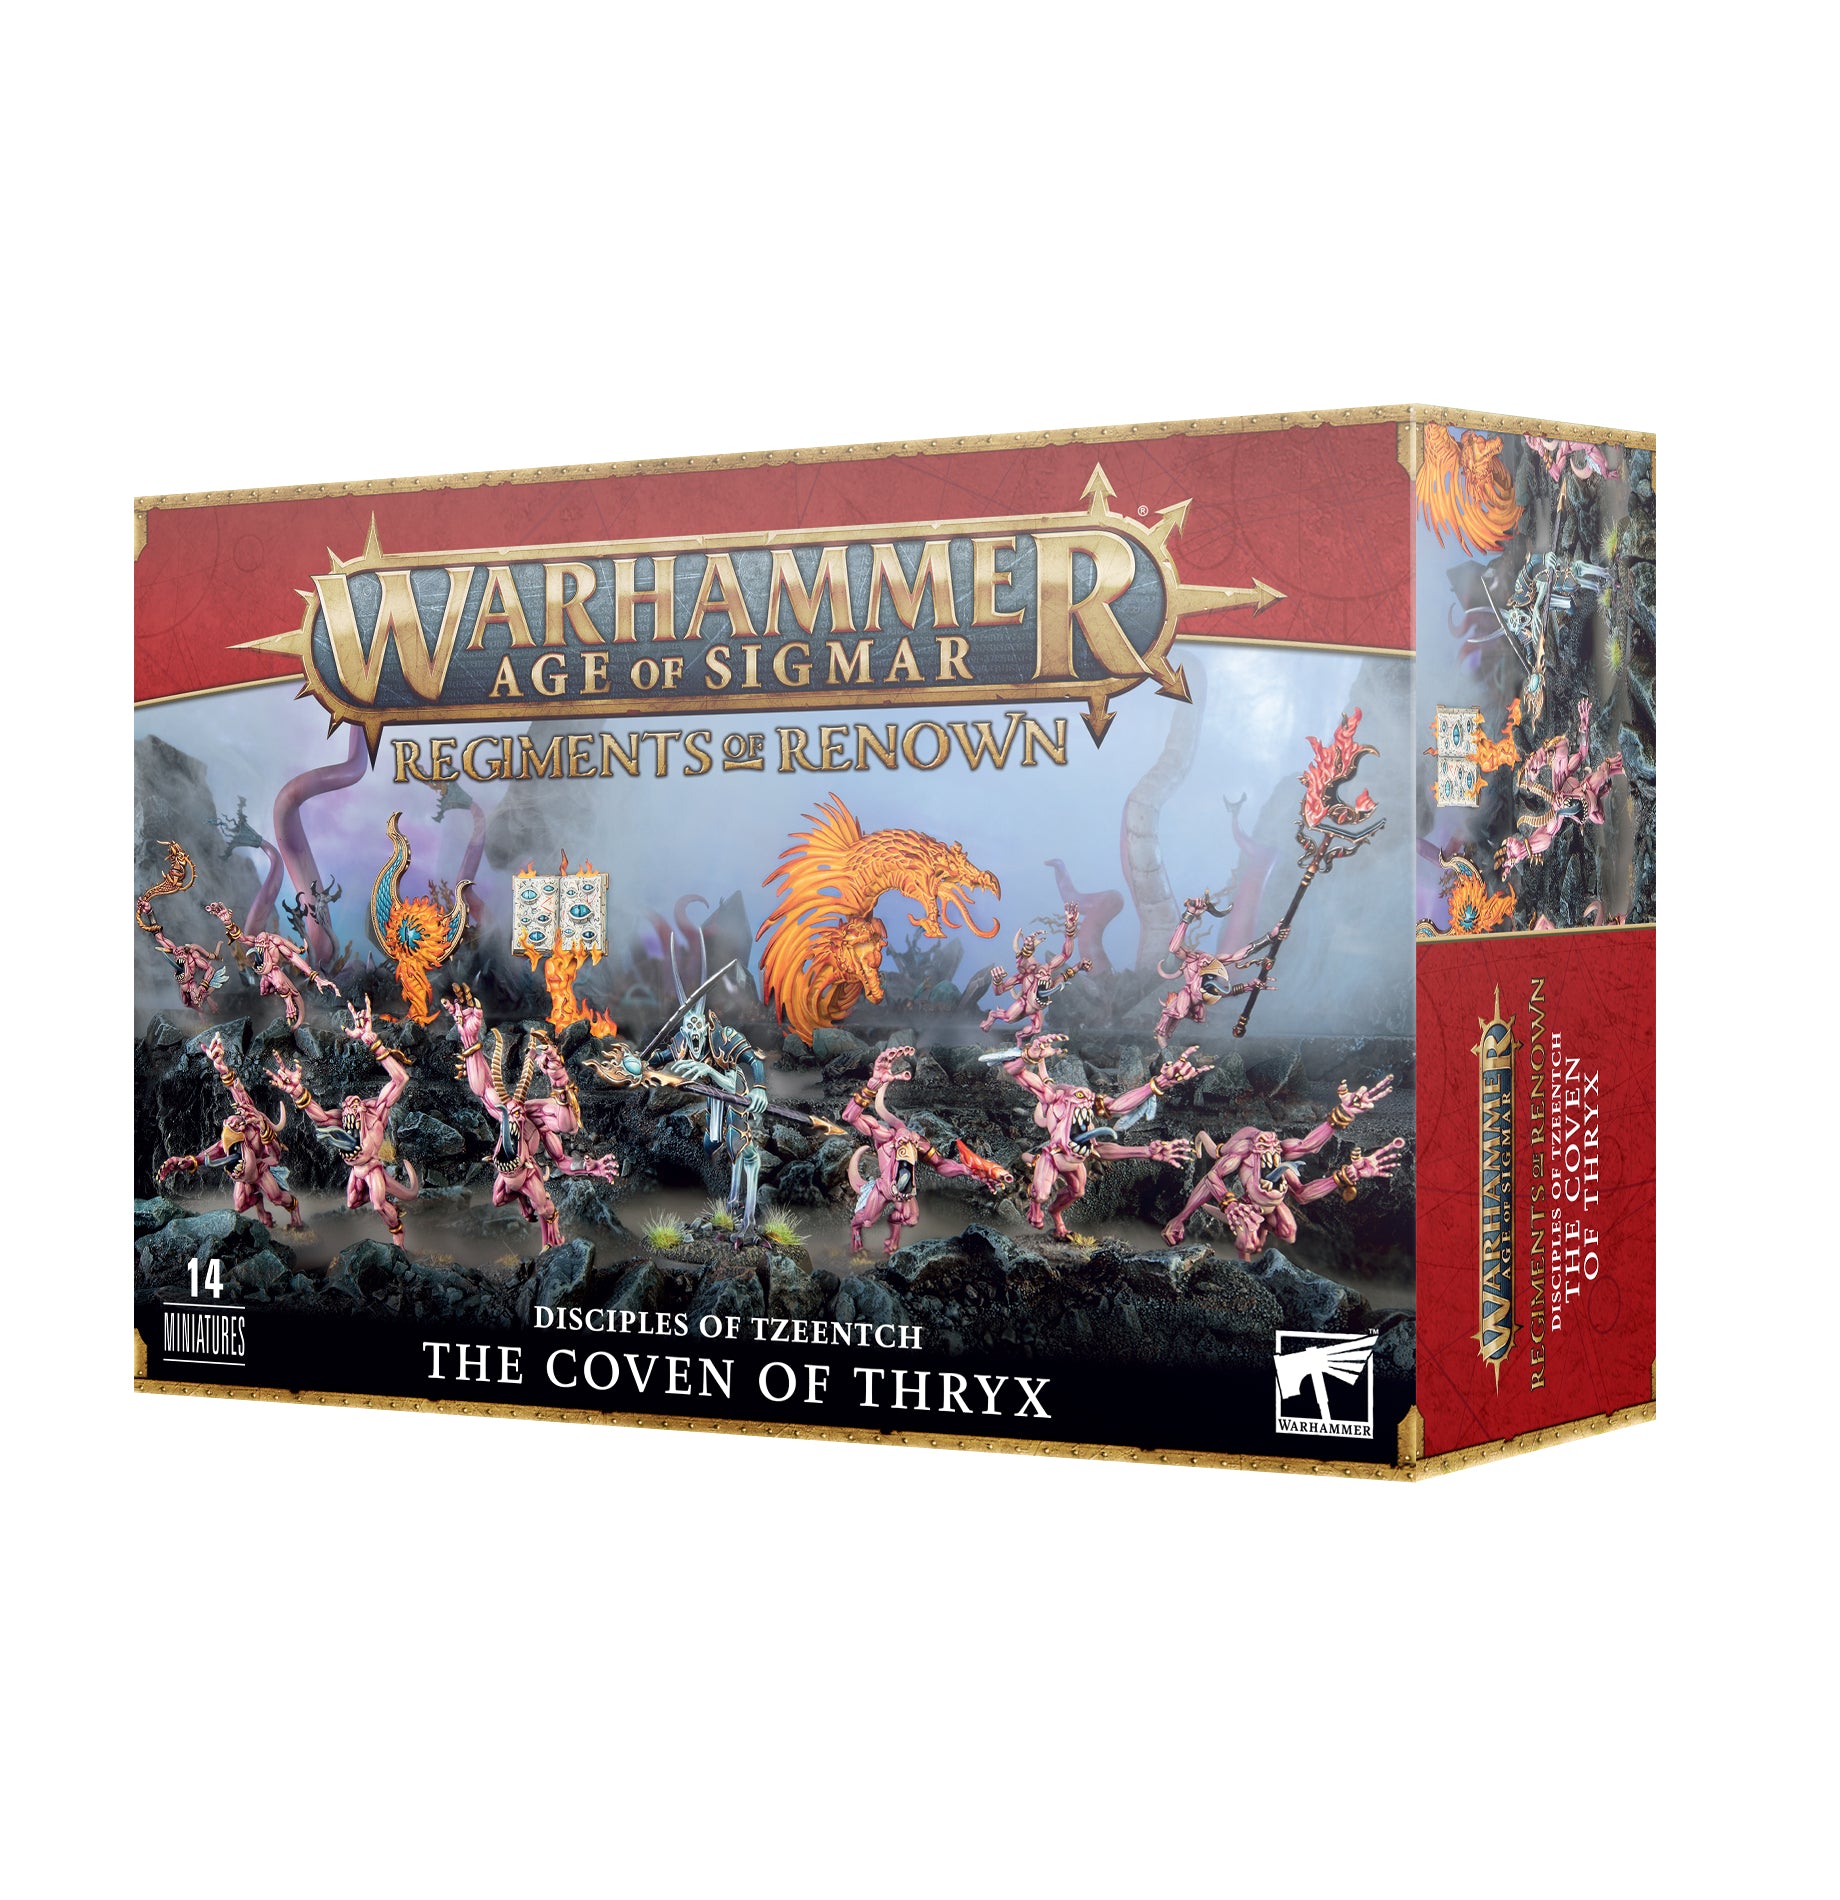 Warhammer Age of Sigmar: Disciples of Tzeentch The Coven of Thryx